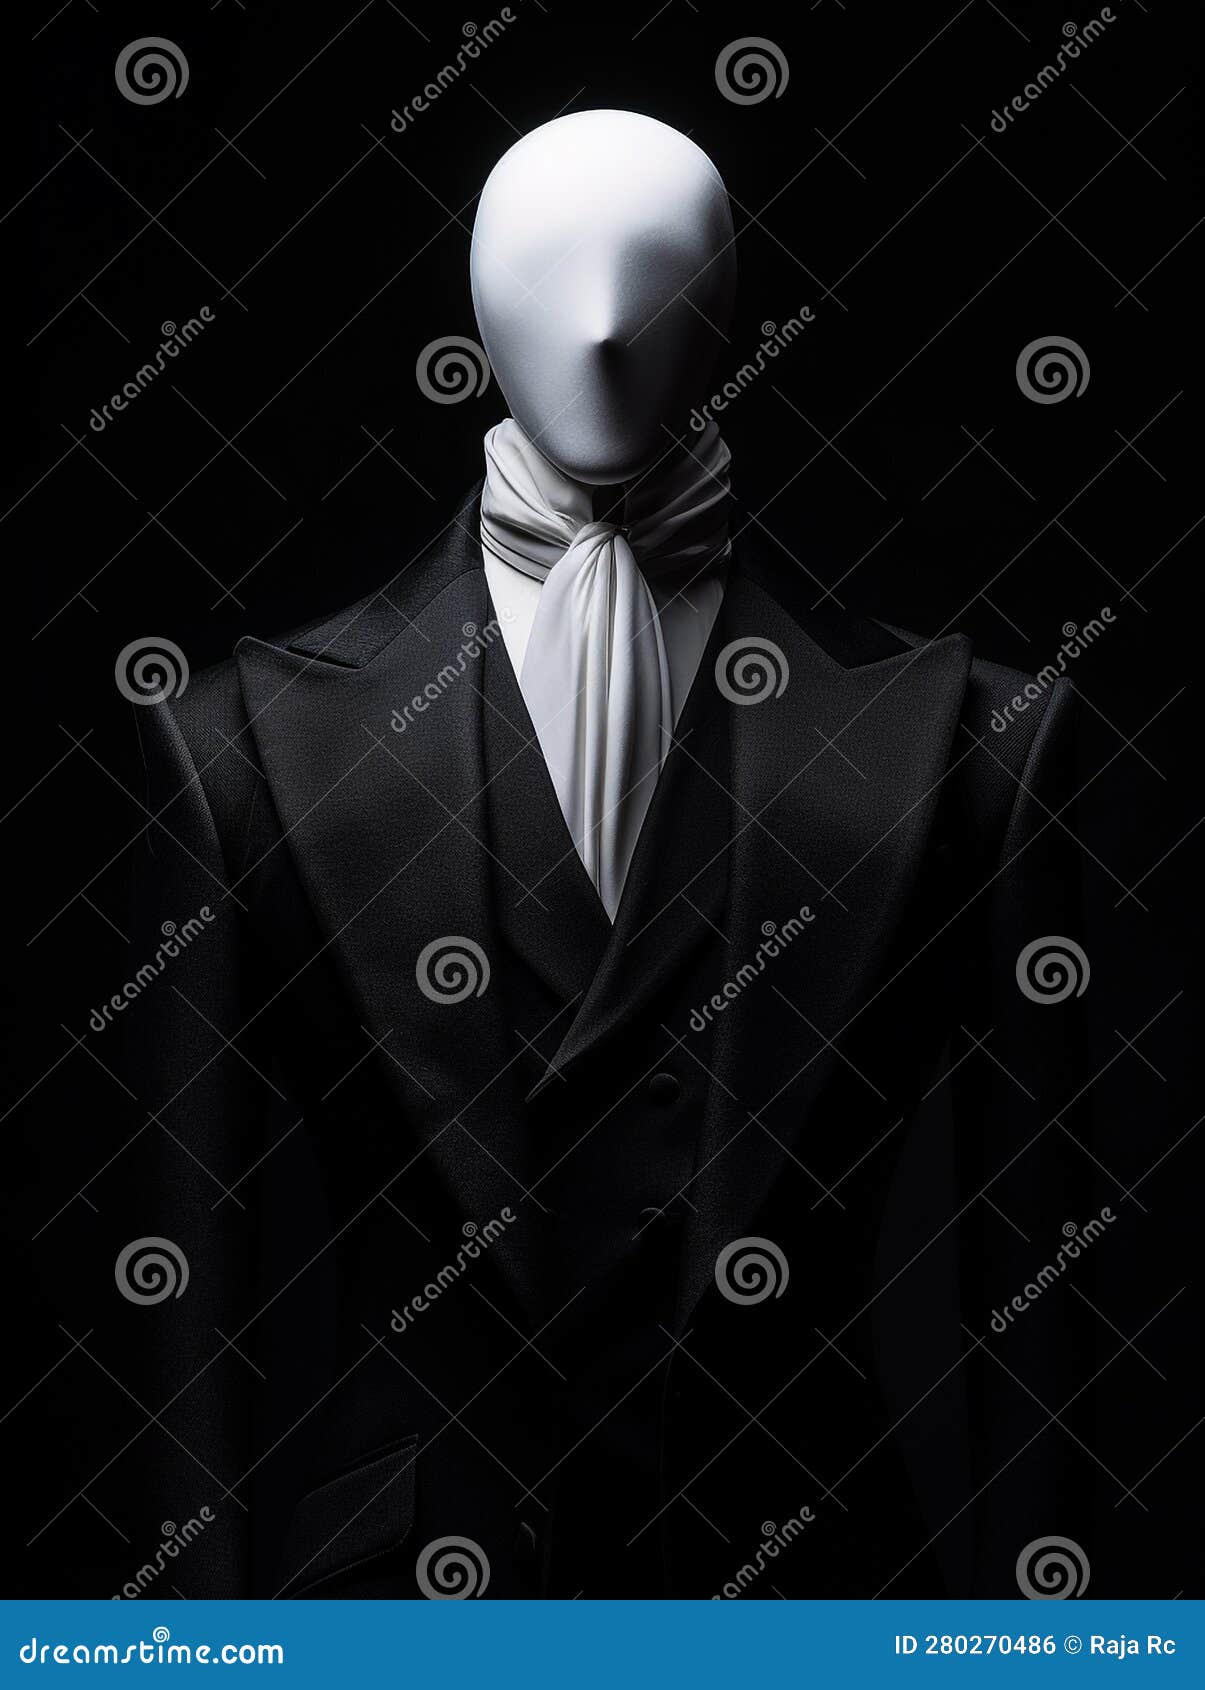 tailored suit on a mannequin